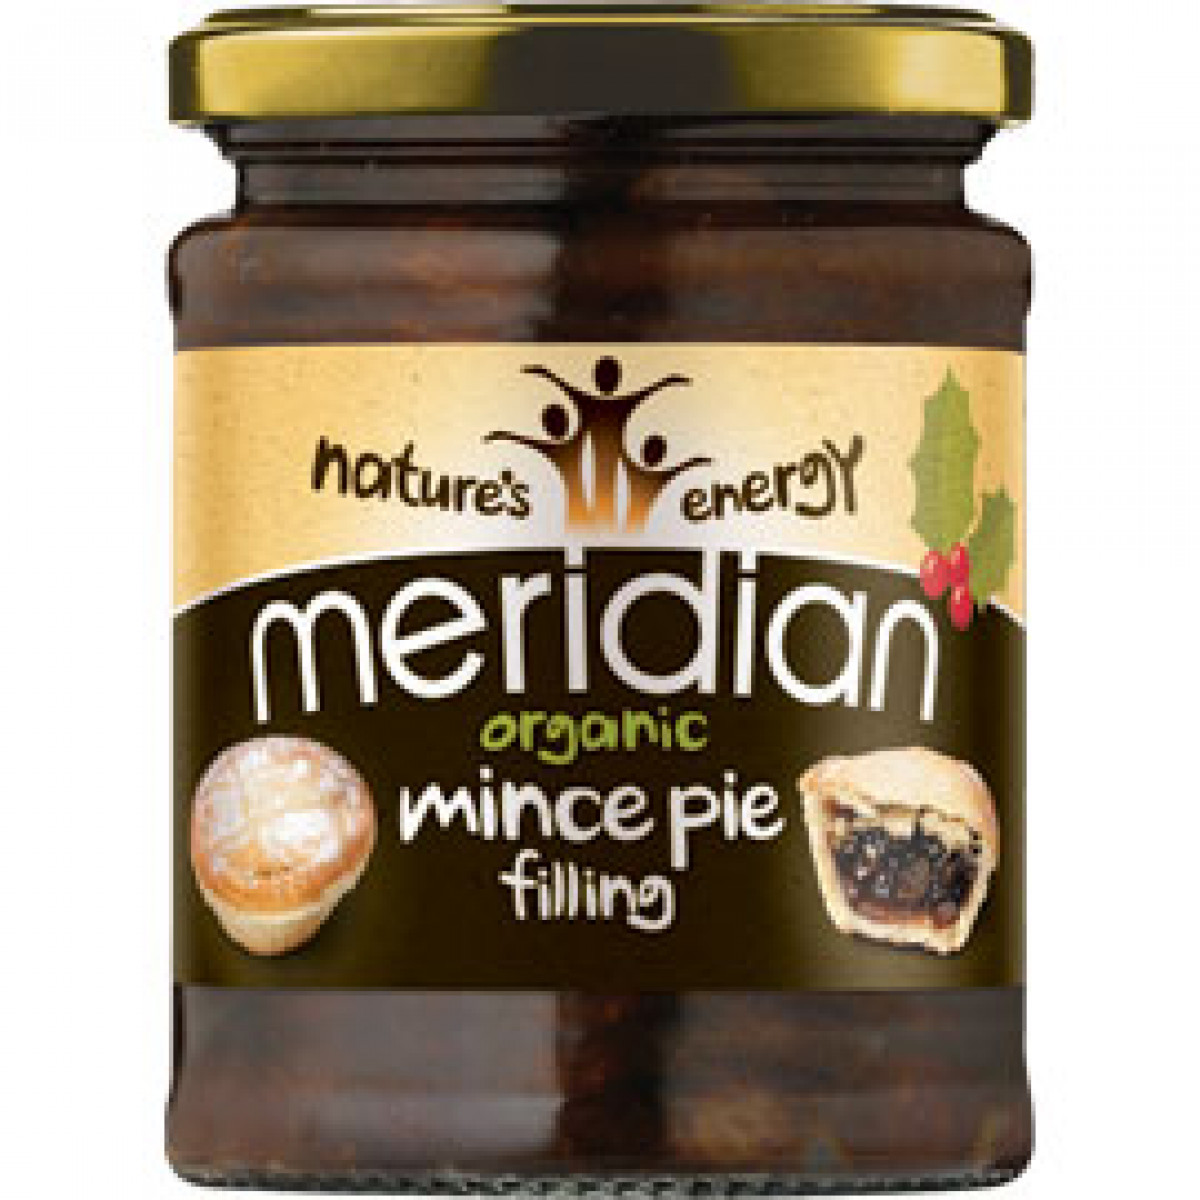 Product picture for Mince Pie Filling